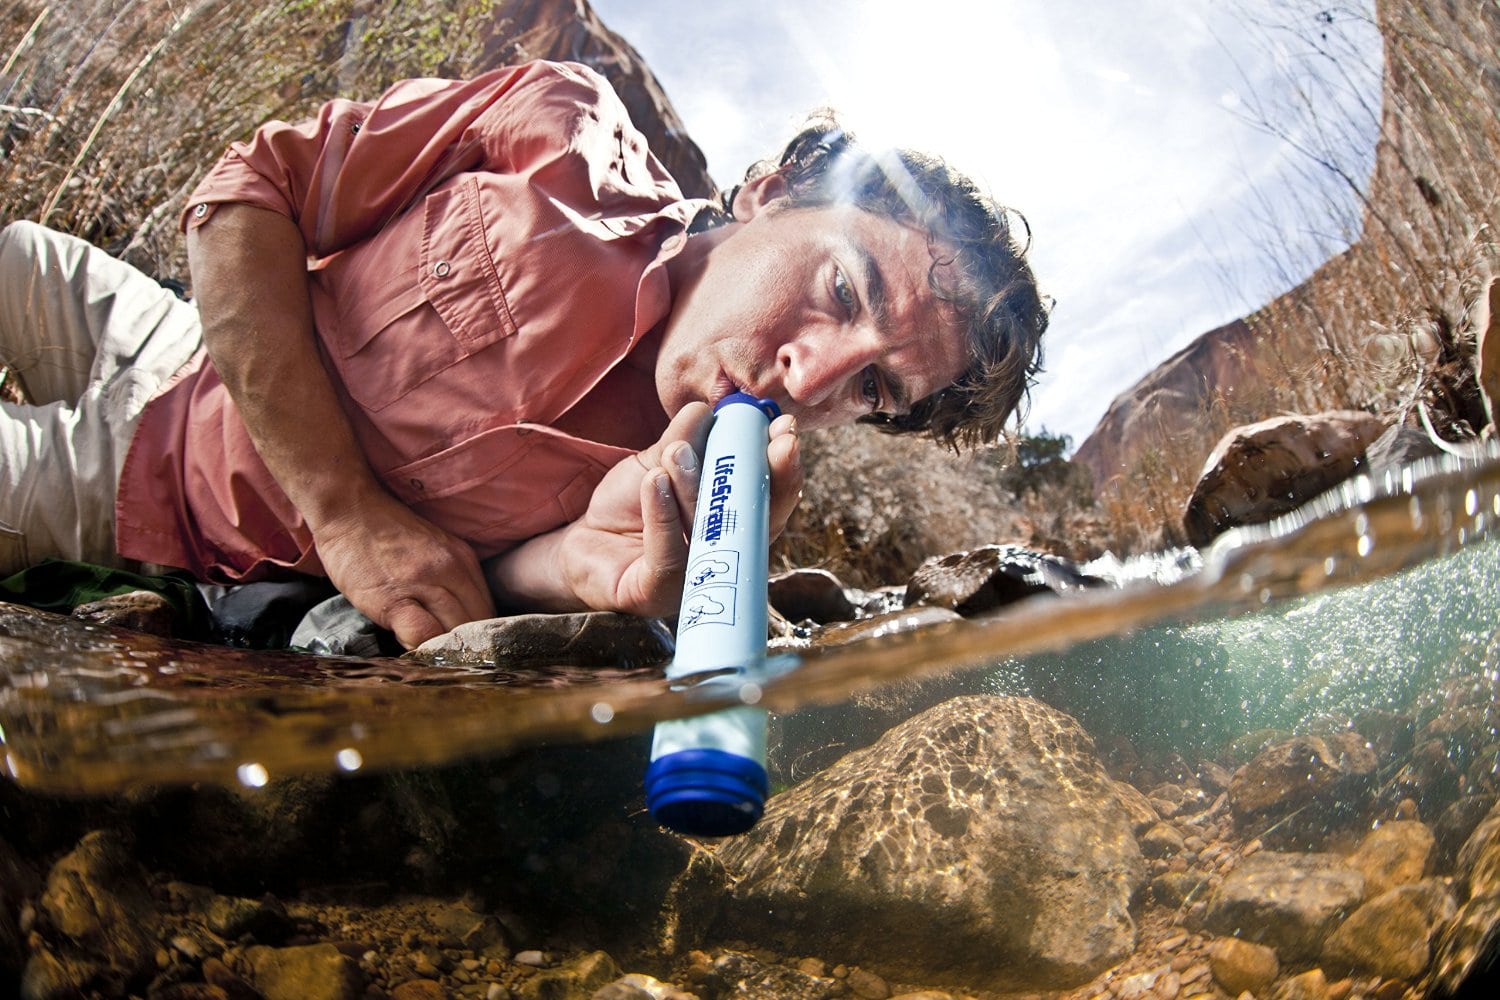 The Best Portable Water Purifiers and Filters for Backpacking, Camping or Emergencies